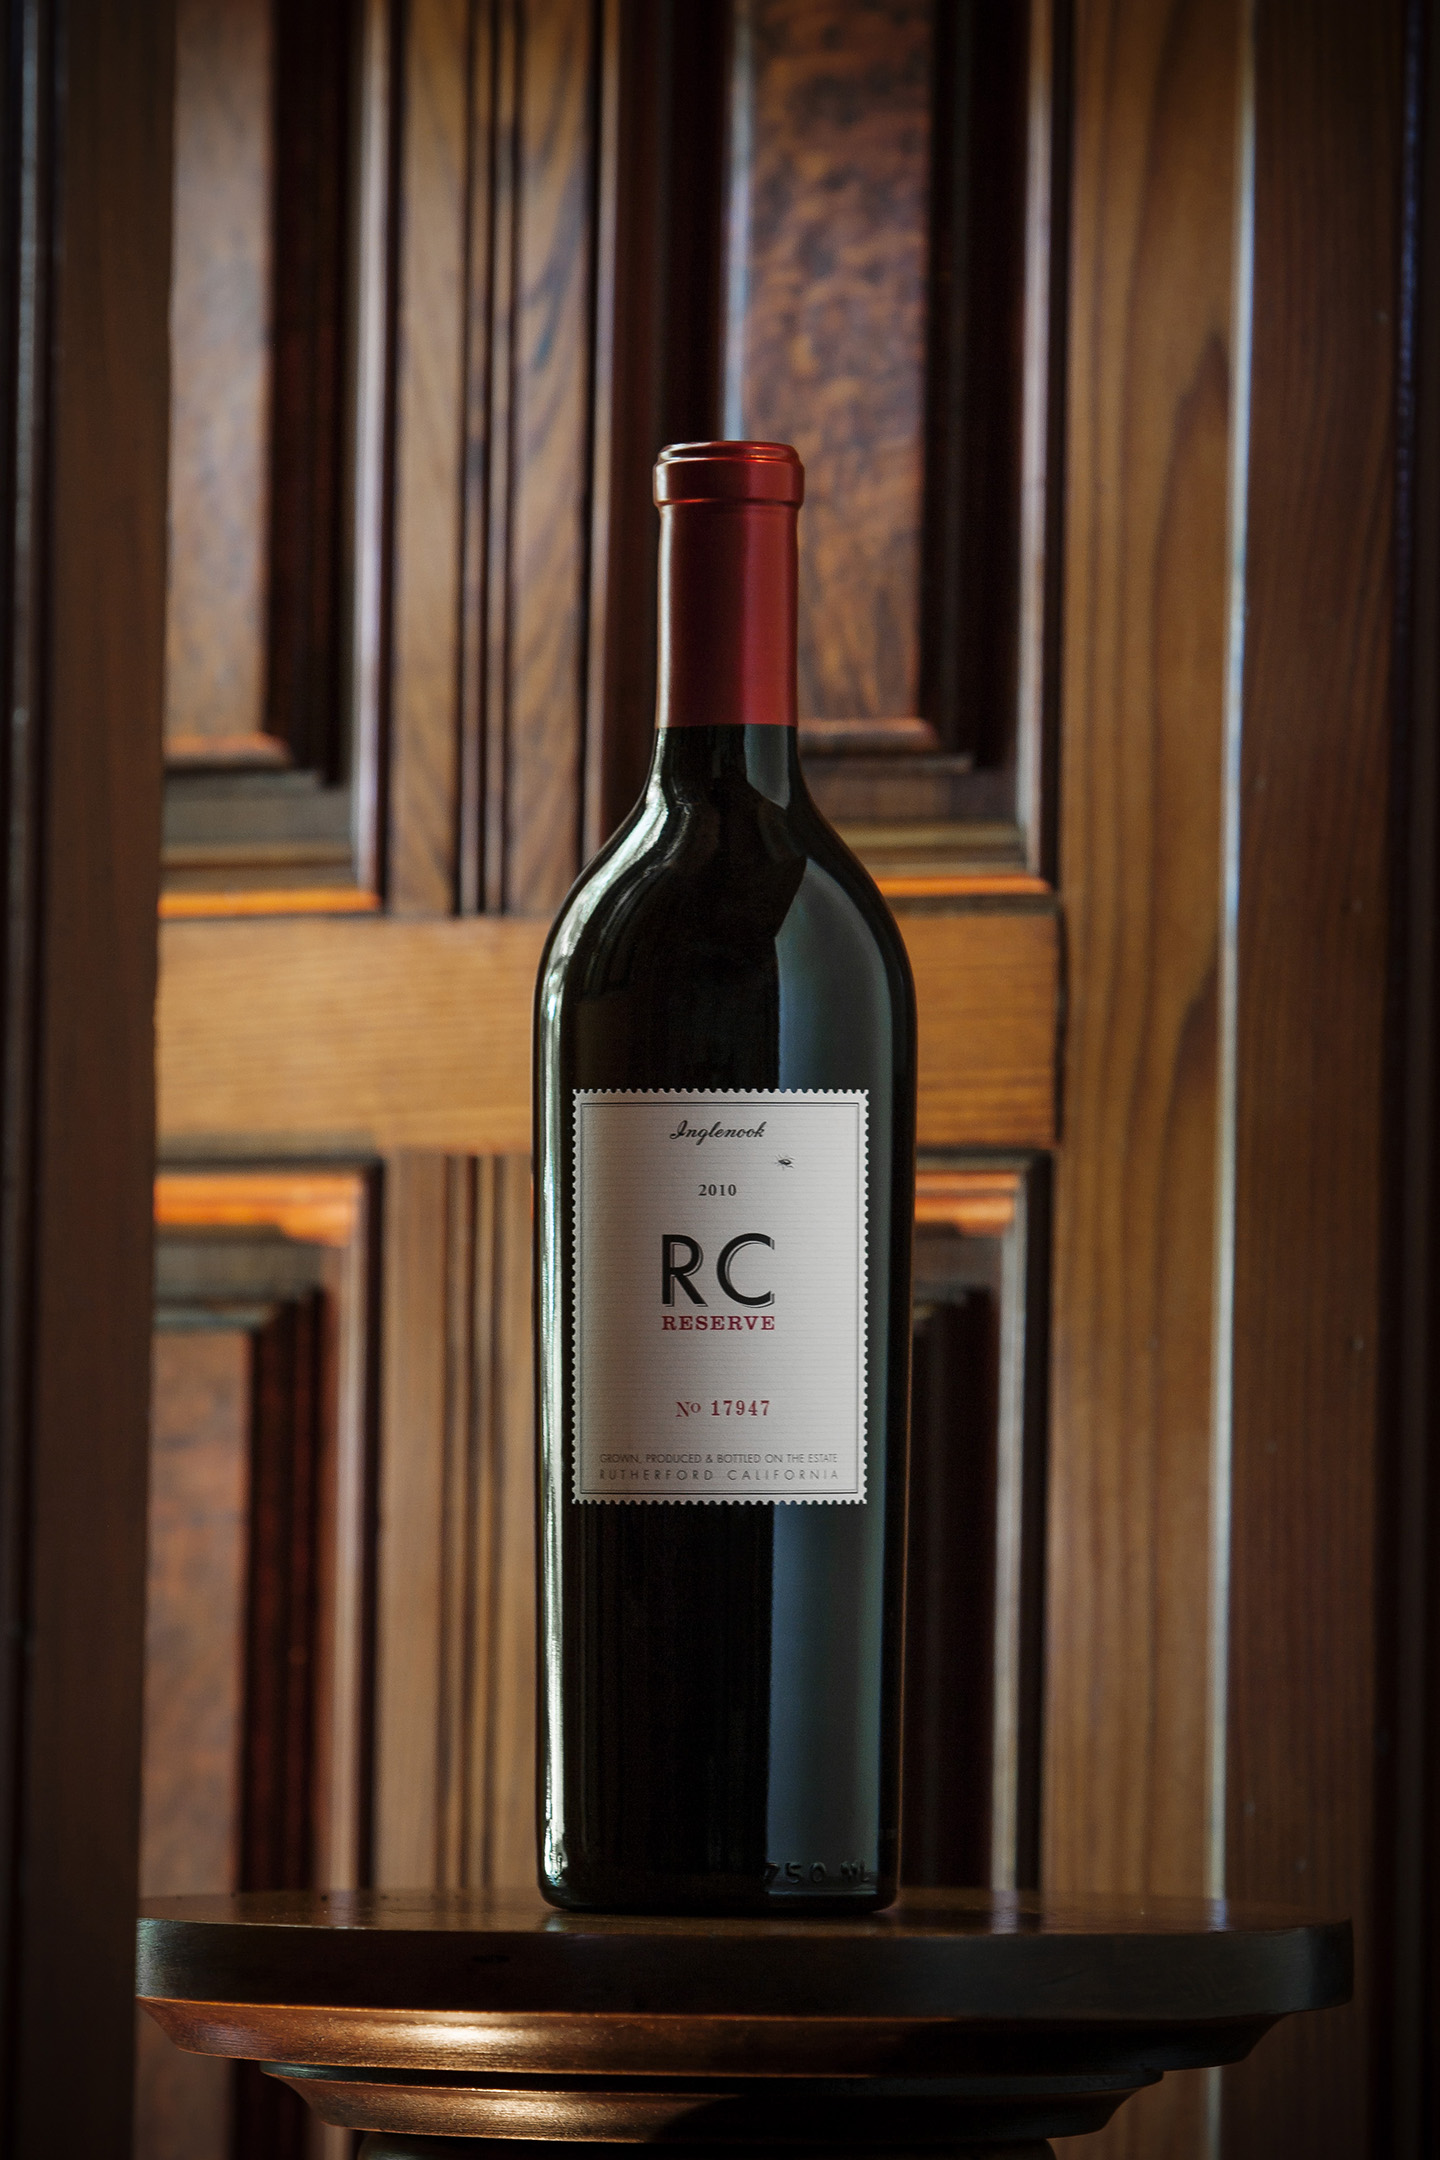 Bottle of RC Reserve Syrah wine sitting on a wooden ledge in front of dark wood paneling.